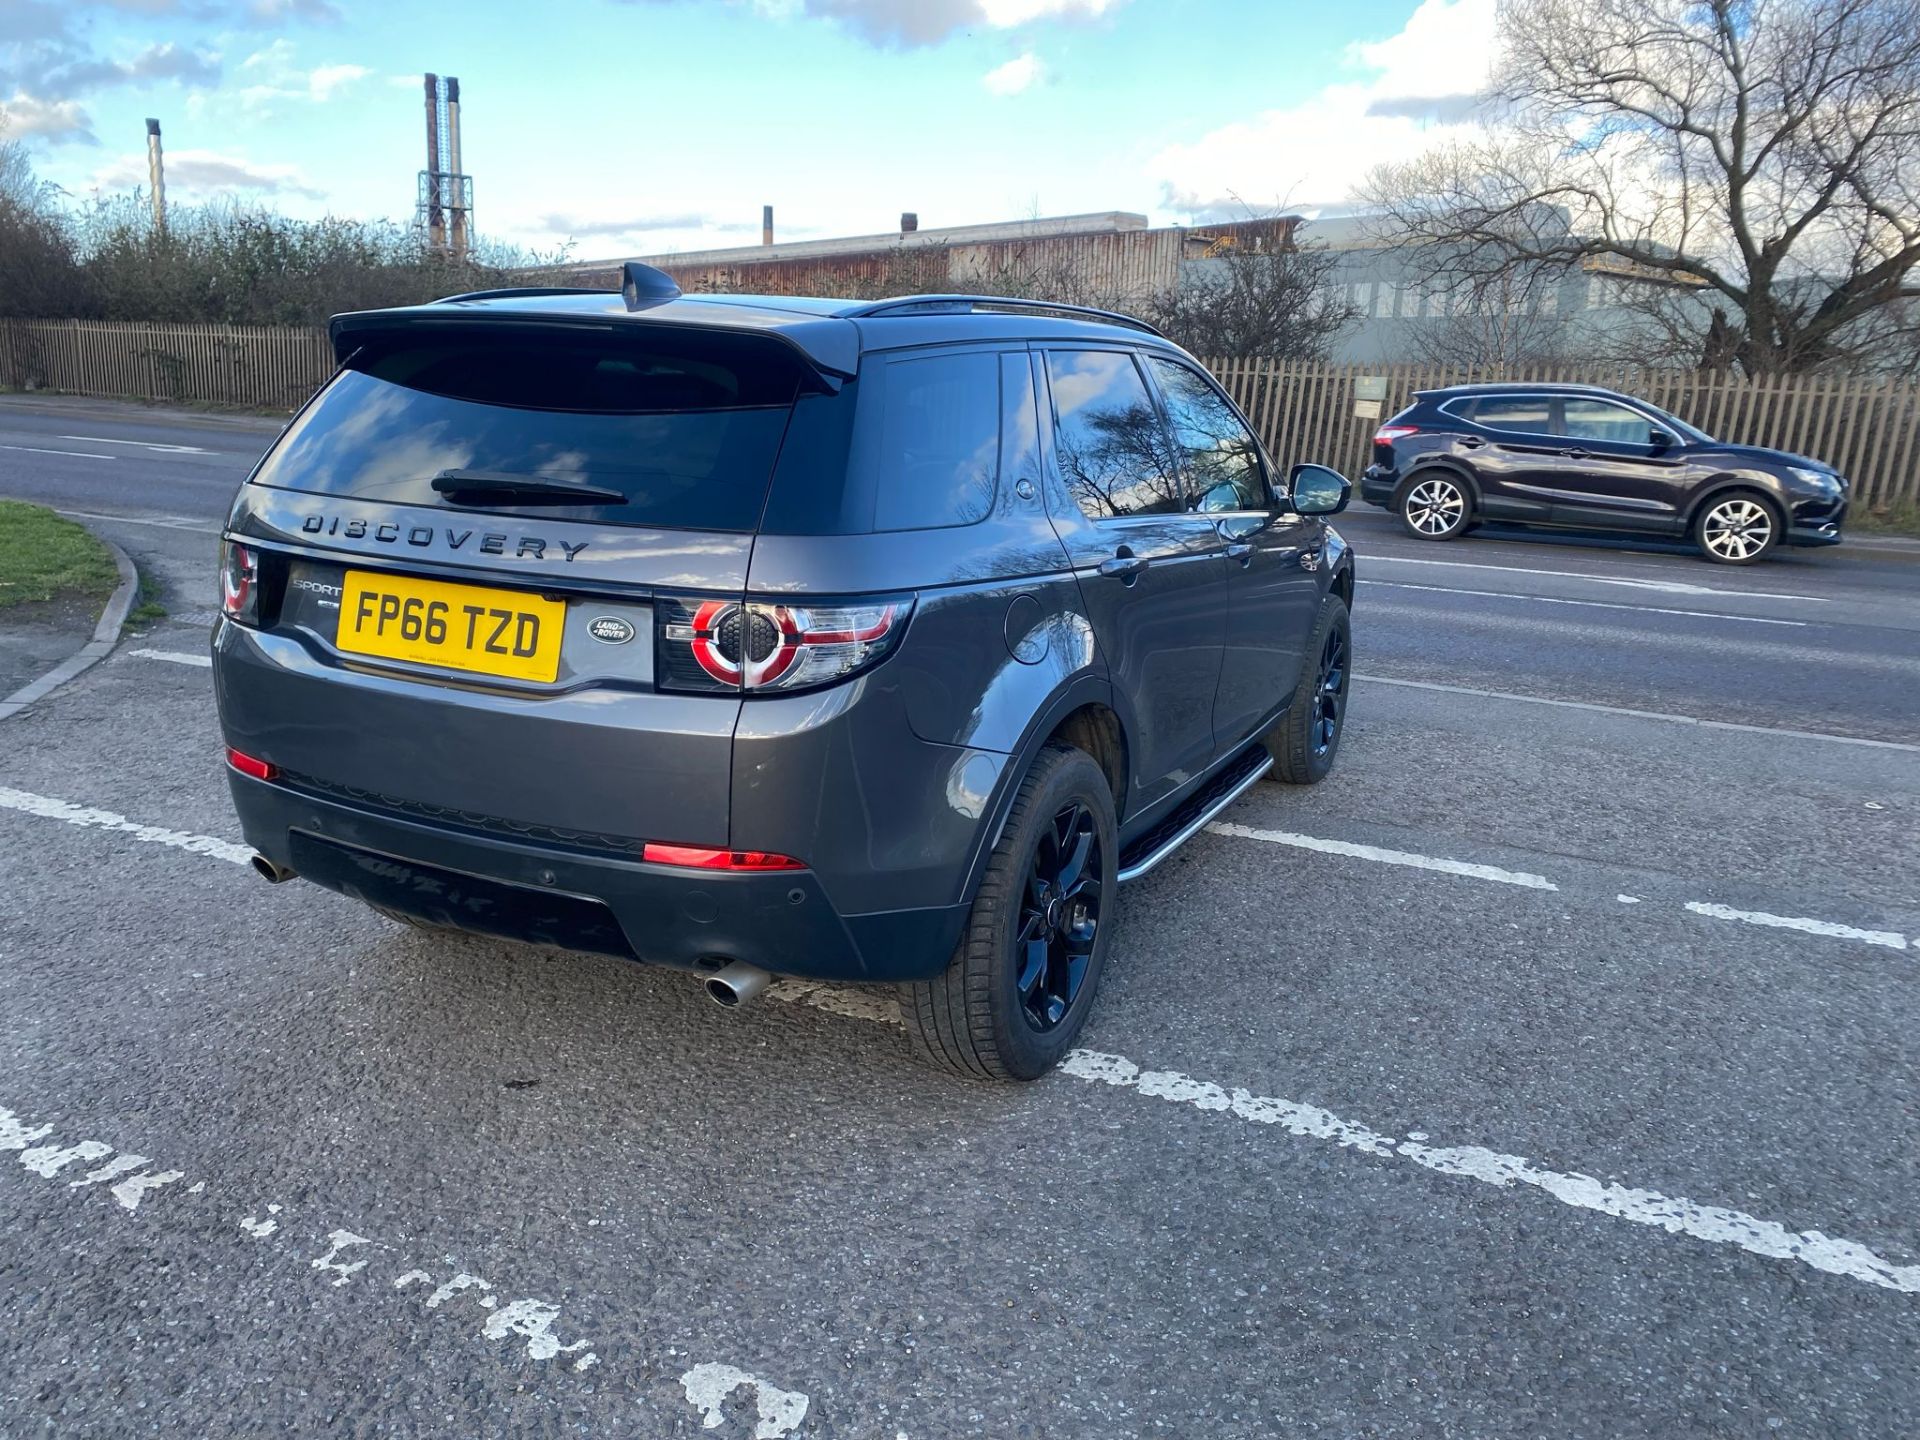 2016 66 LAND ROVER DISCOVERY SPORT HSE SUV ESTATE- 88K WITH LAND ROVER SERVICE HISTORY - PAN ROOF. - Image 3 of 19